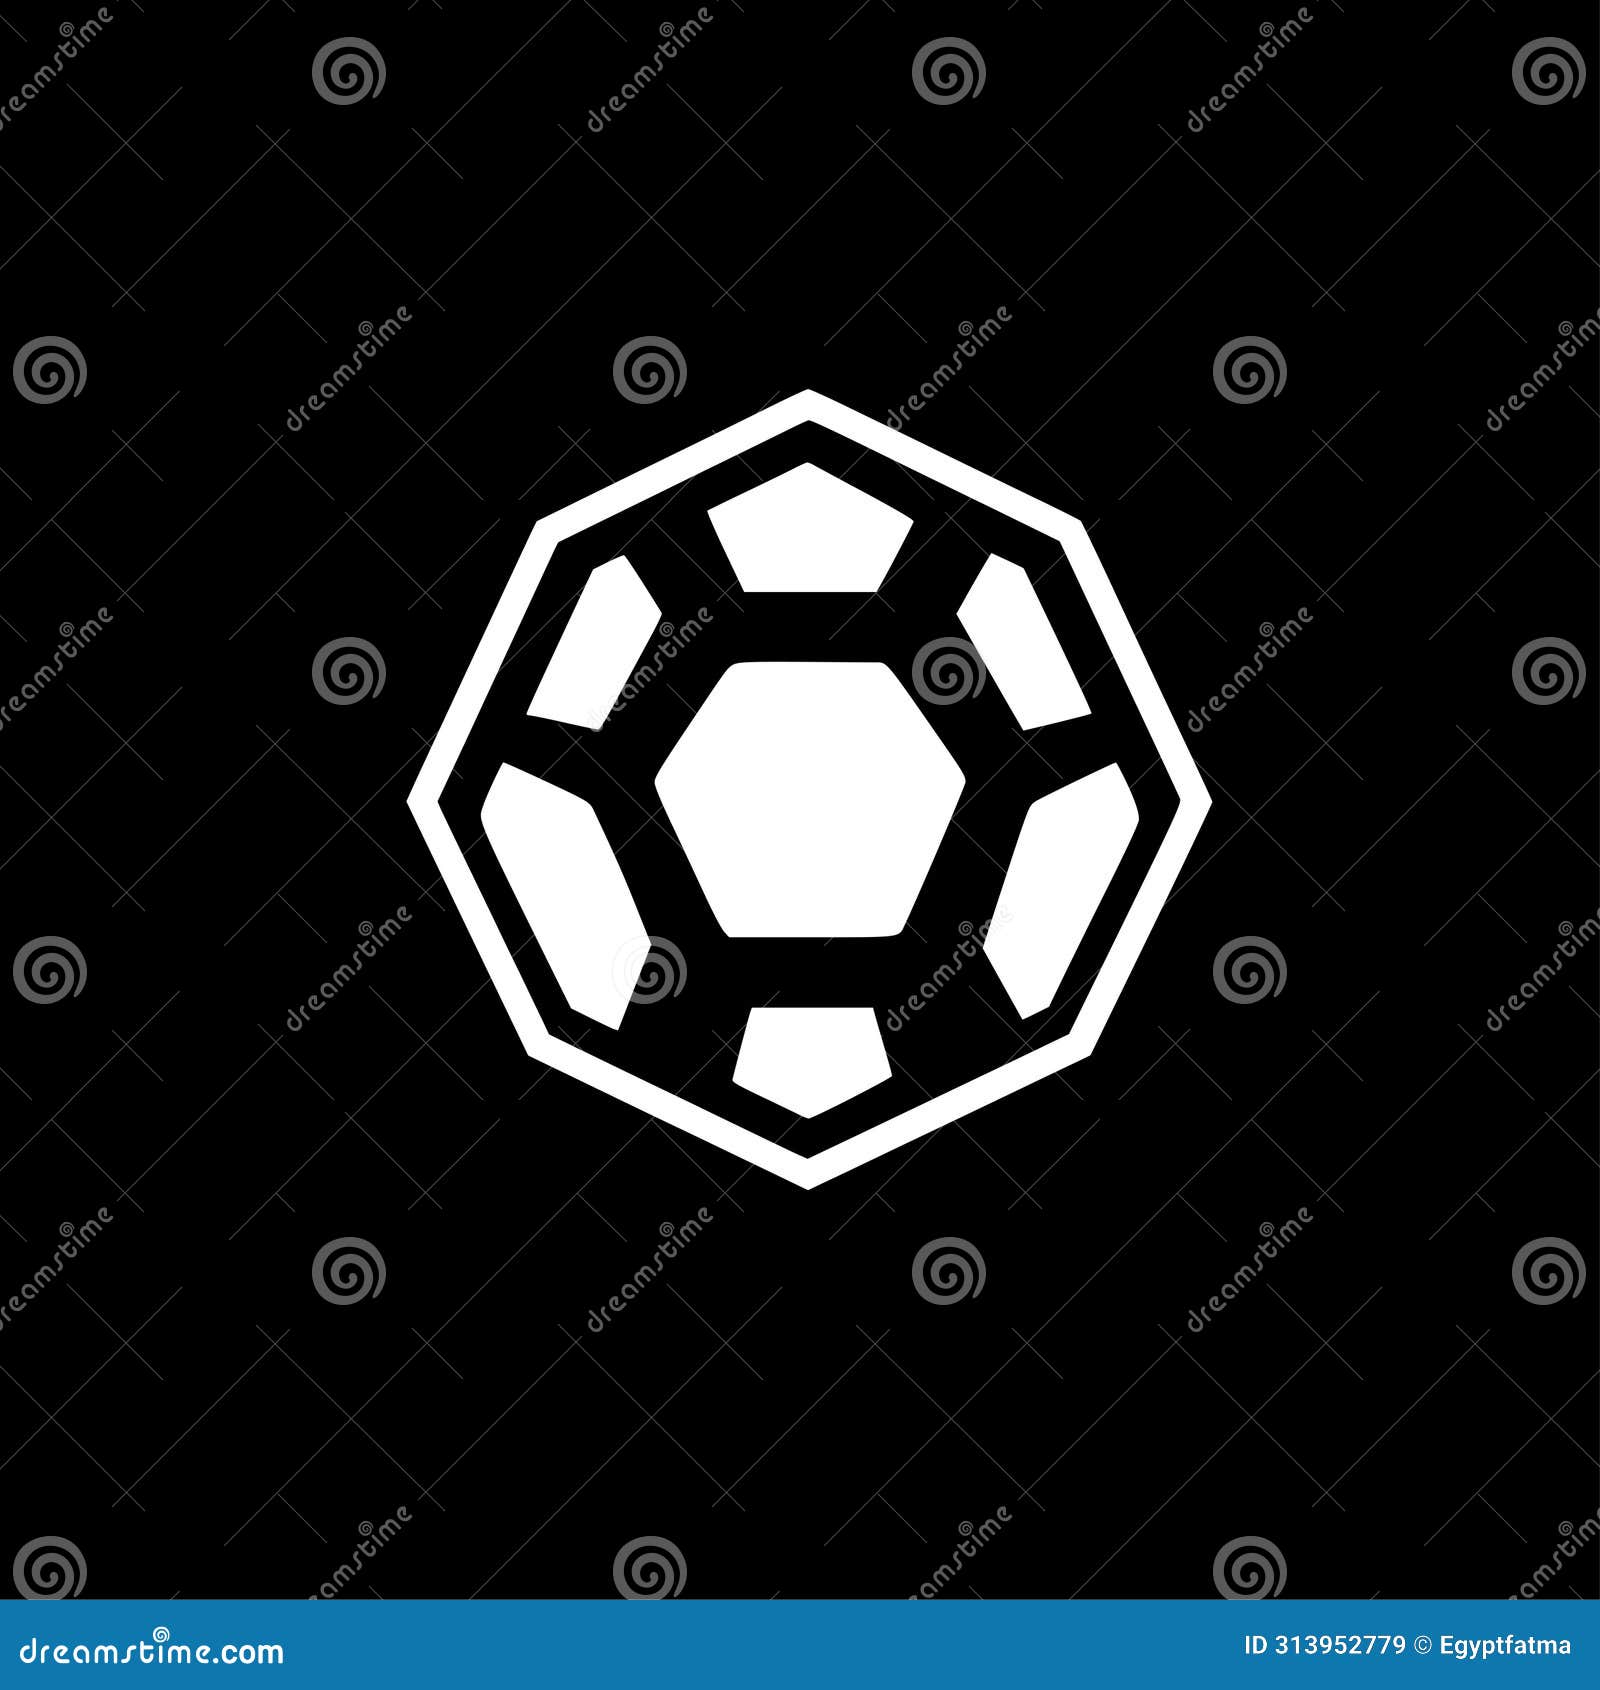 soccer - minimalist and simple silhouette -  